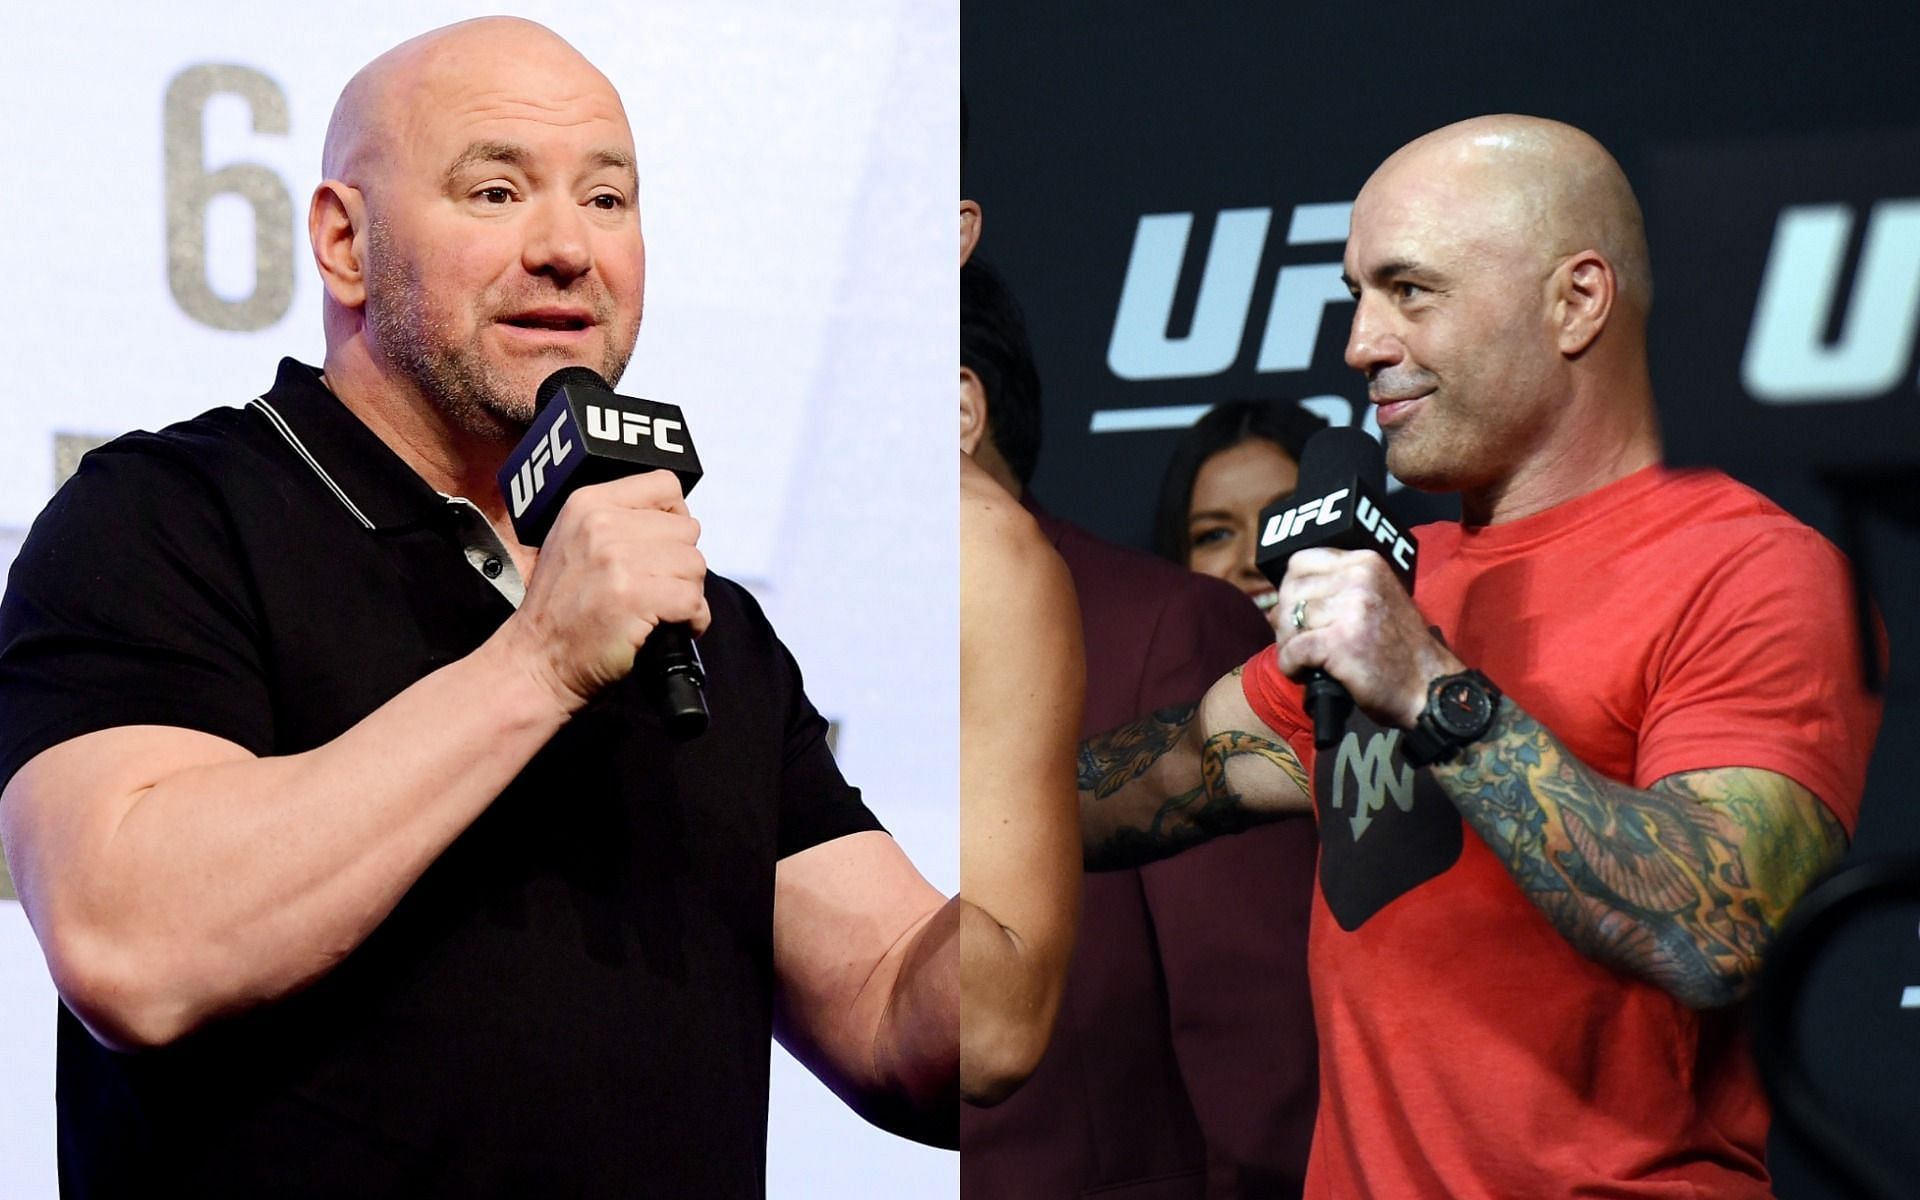 Dana White (left) and Joe Rogan (right) at various UFC events